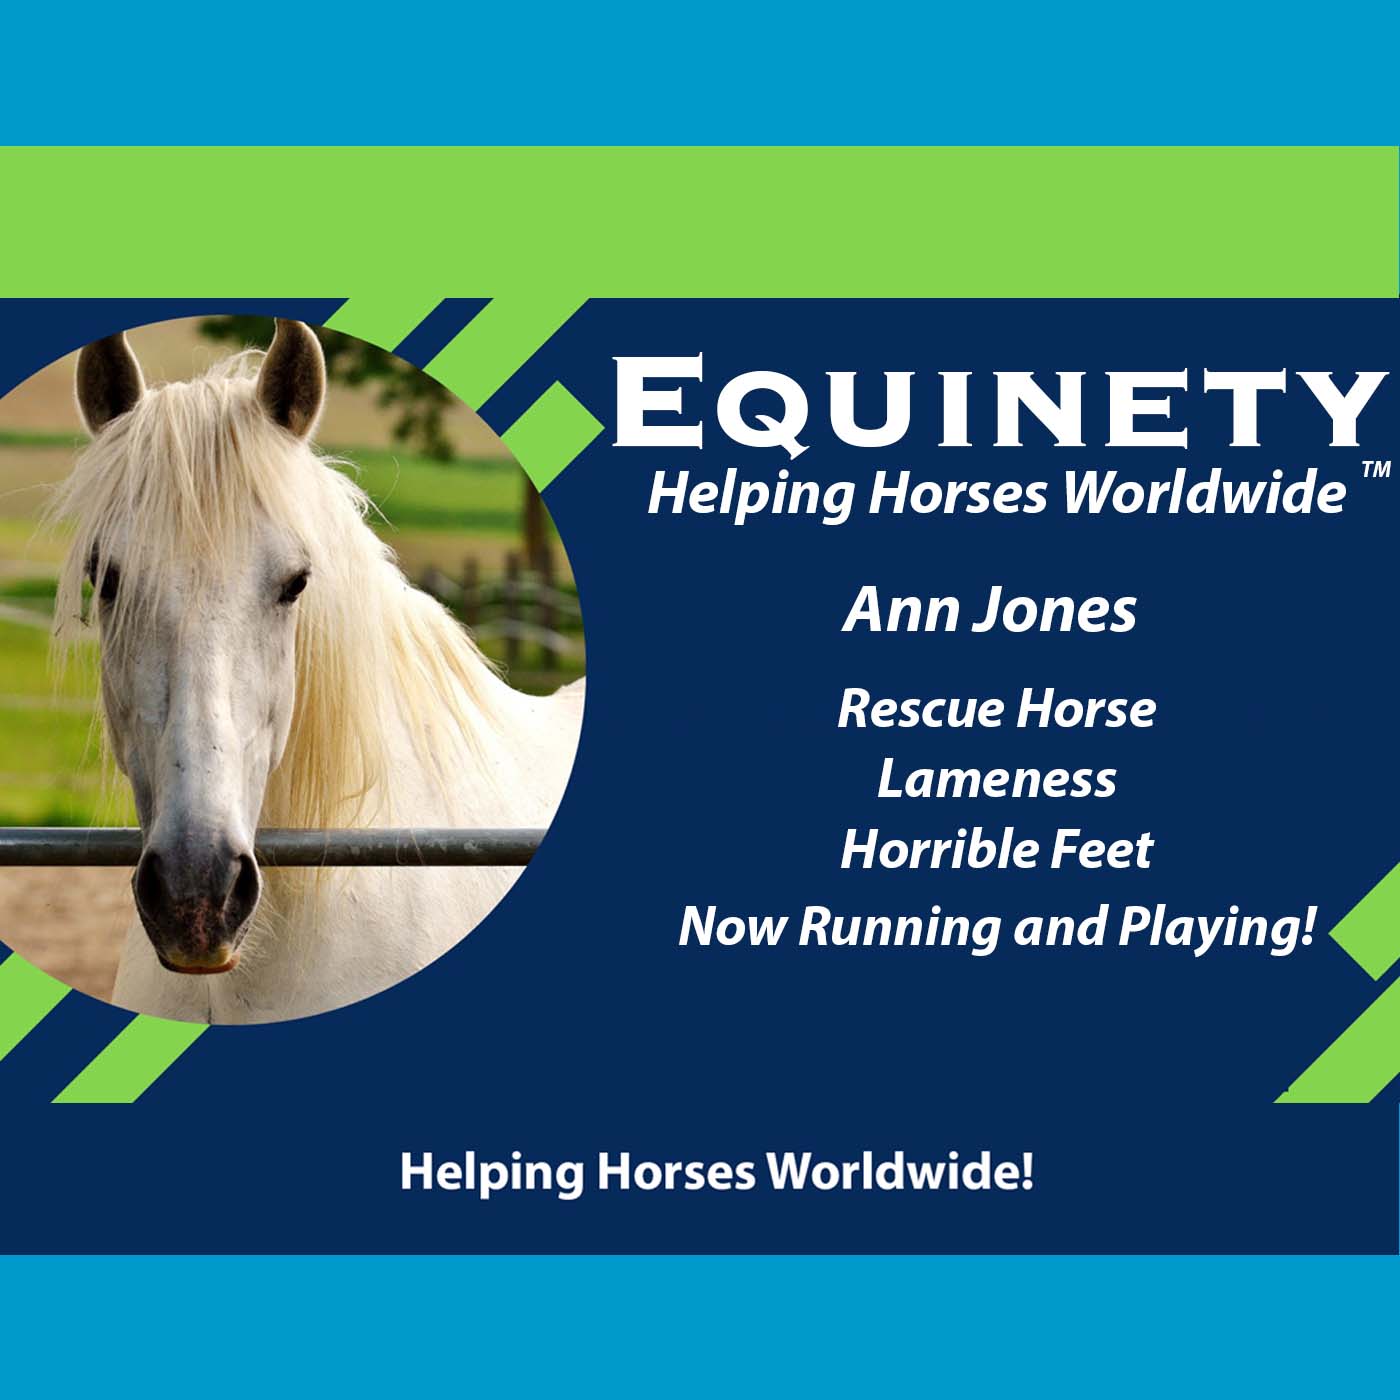 Ann Jones - rescue horse – lame - horrible feet – now running and playing